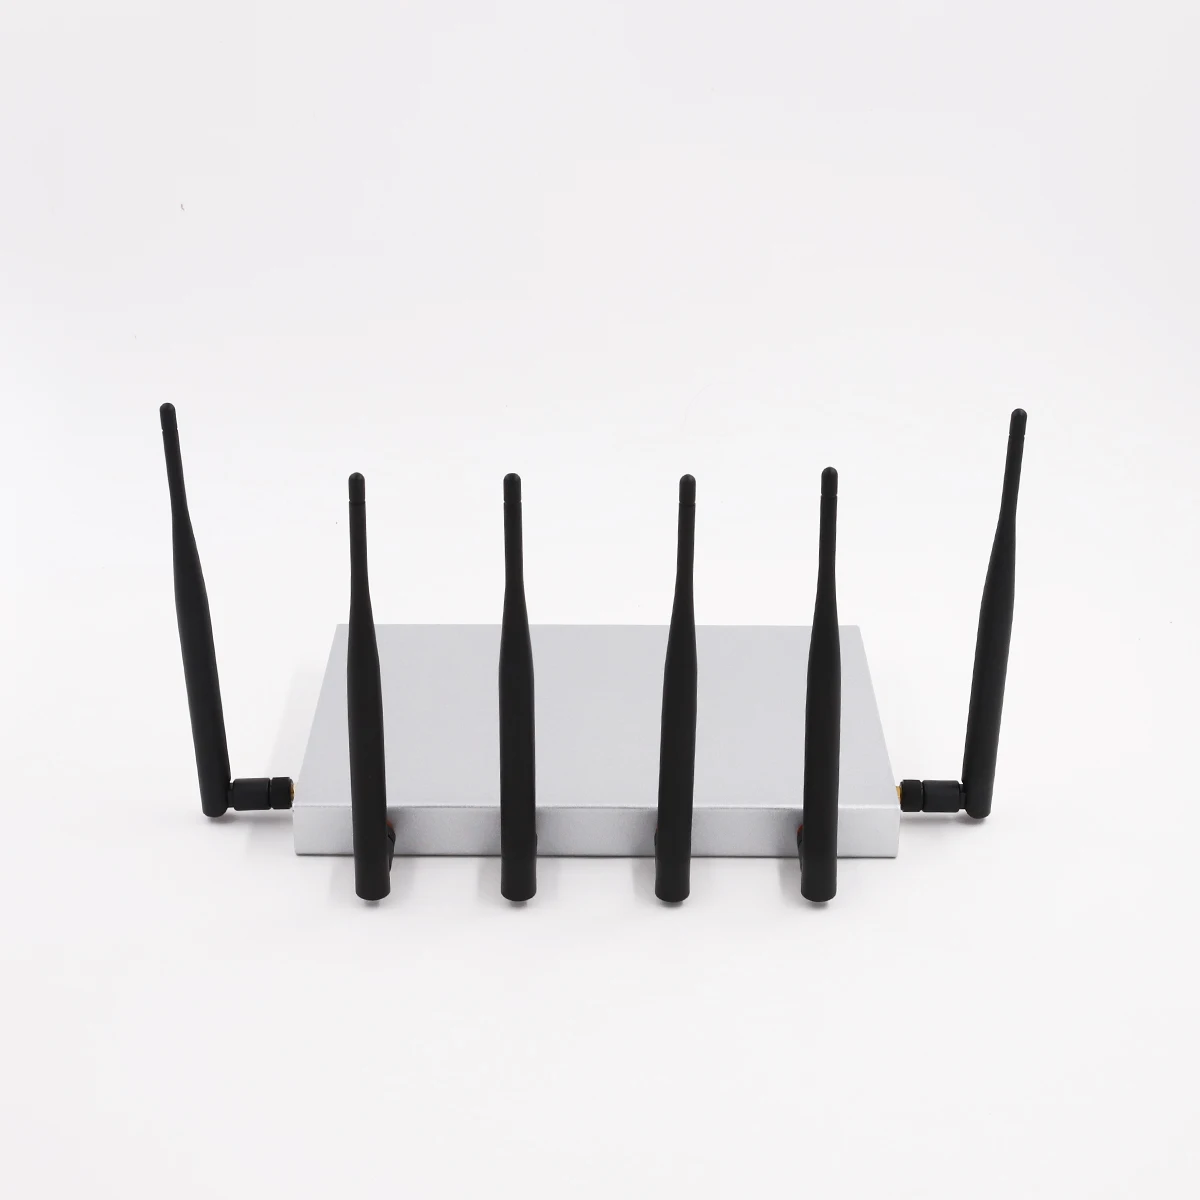 
WG3526 wifi router with best range for United states 